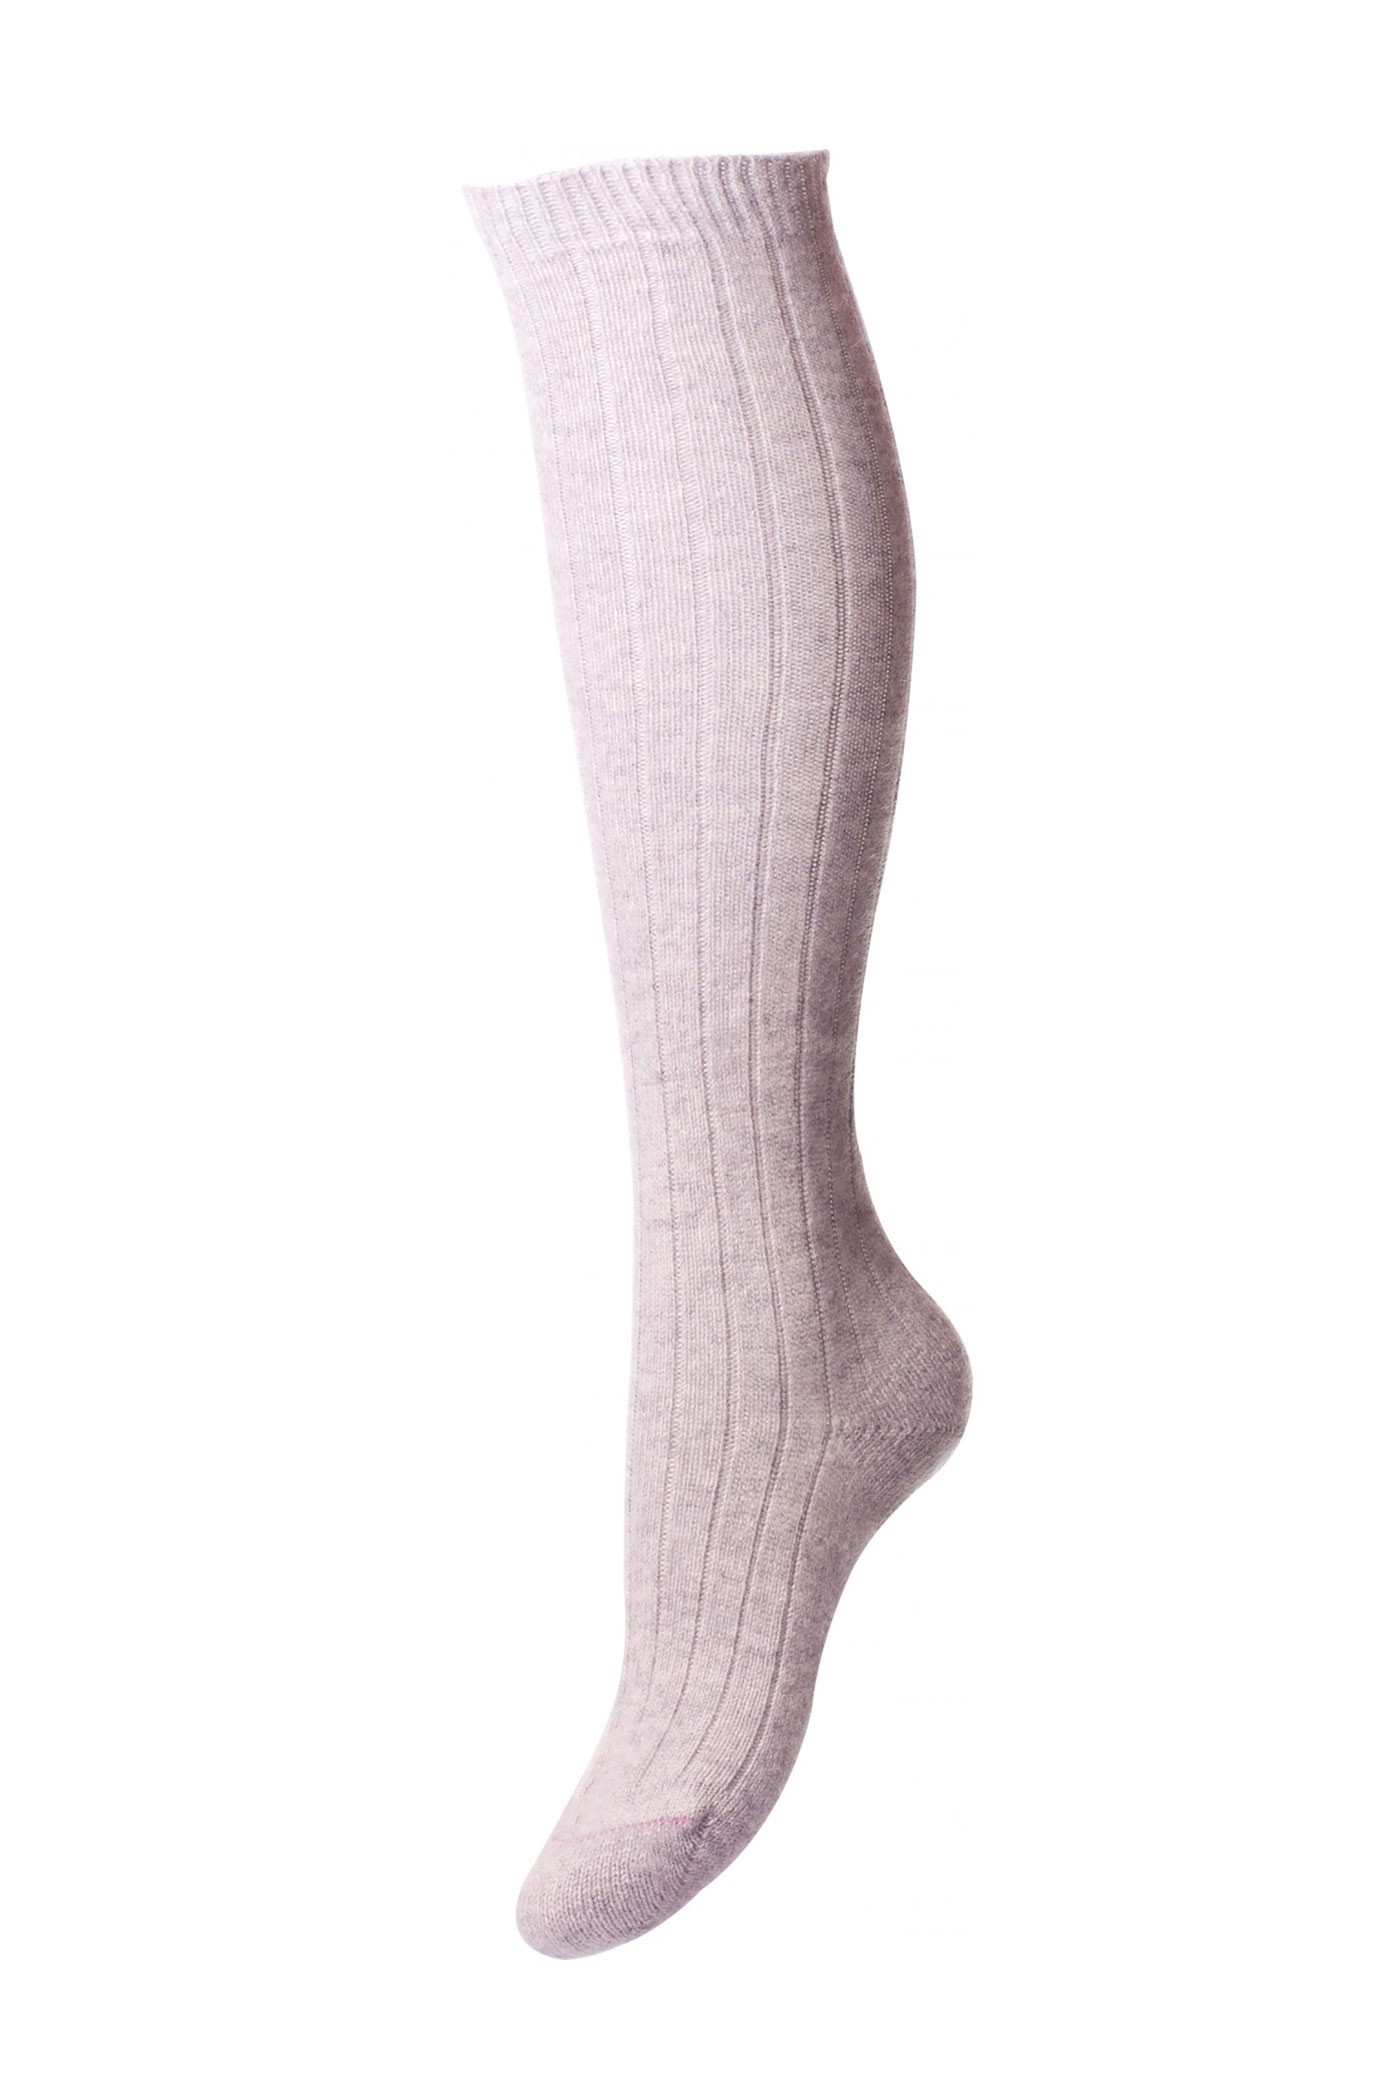 Pantherella Women's Tabitha Knee High Cashmere Ribbed Socks in Light Grey